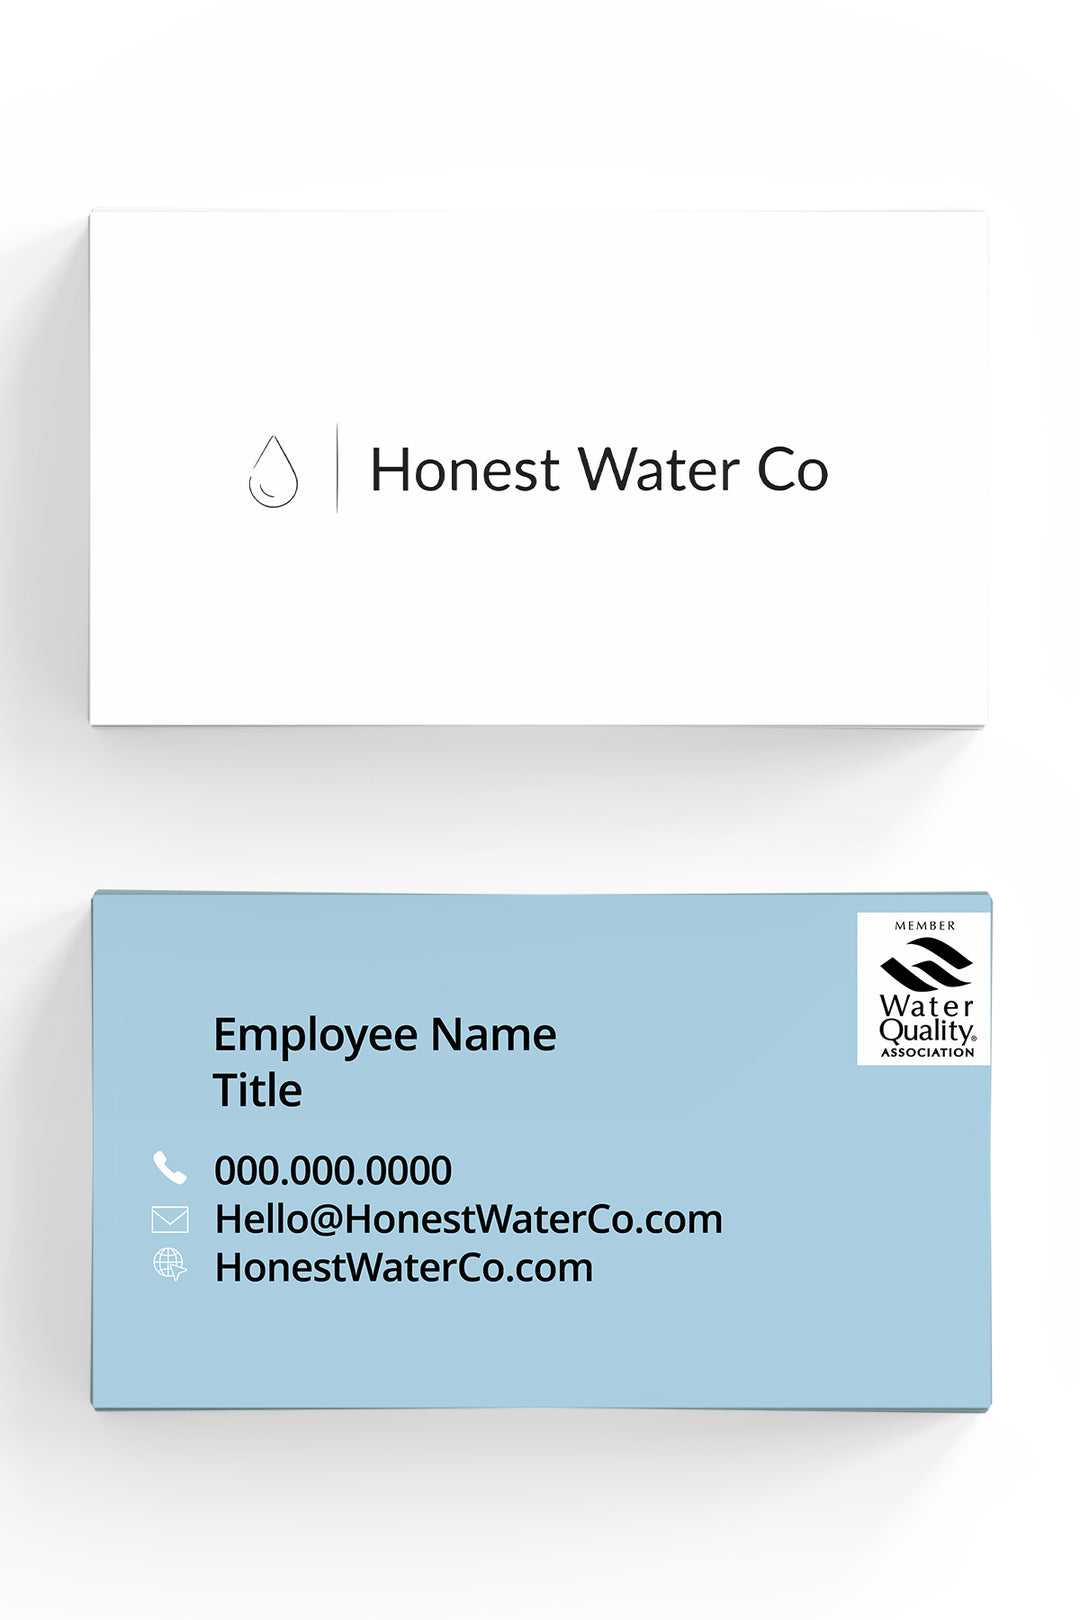 Honest Water Co Business Cards